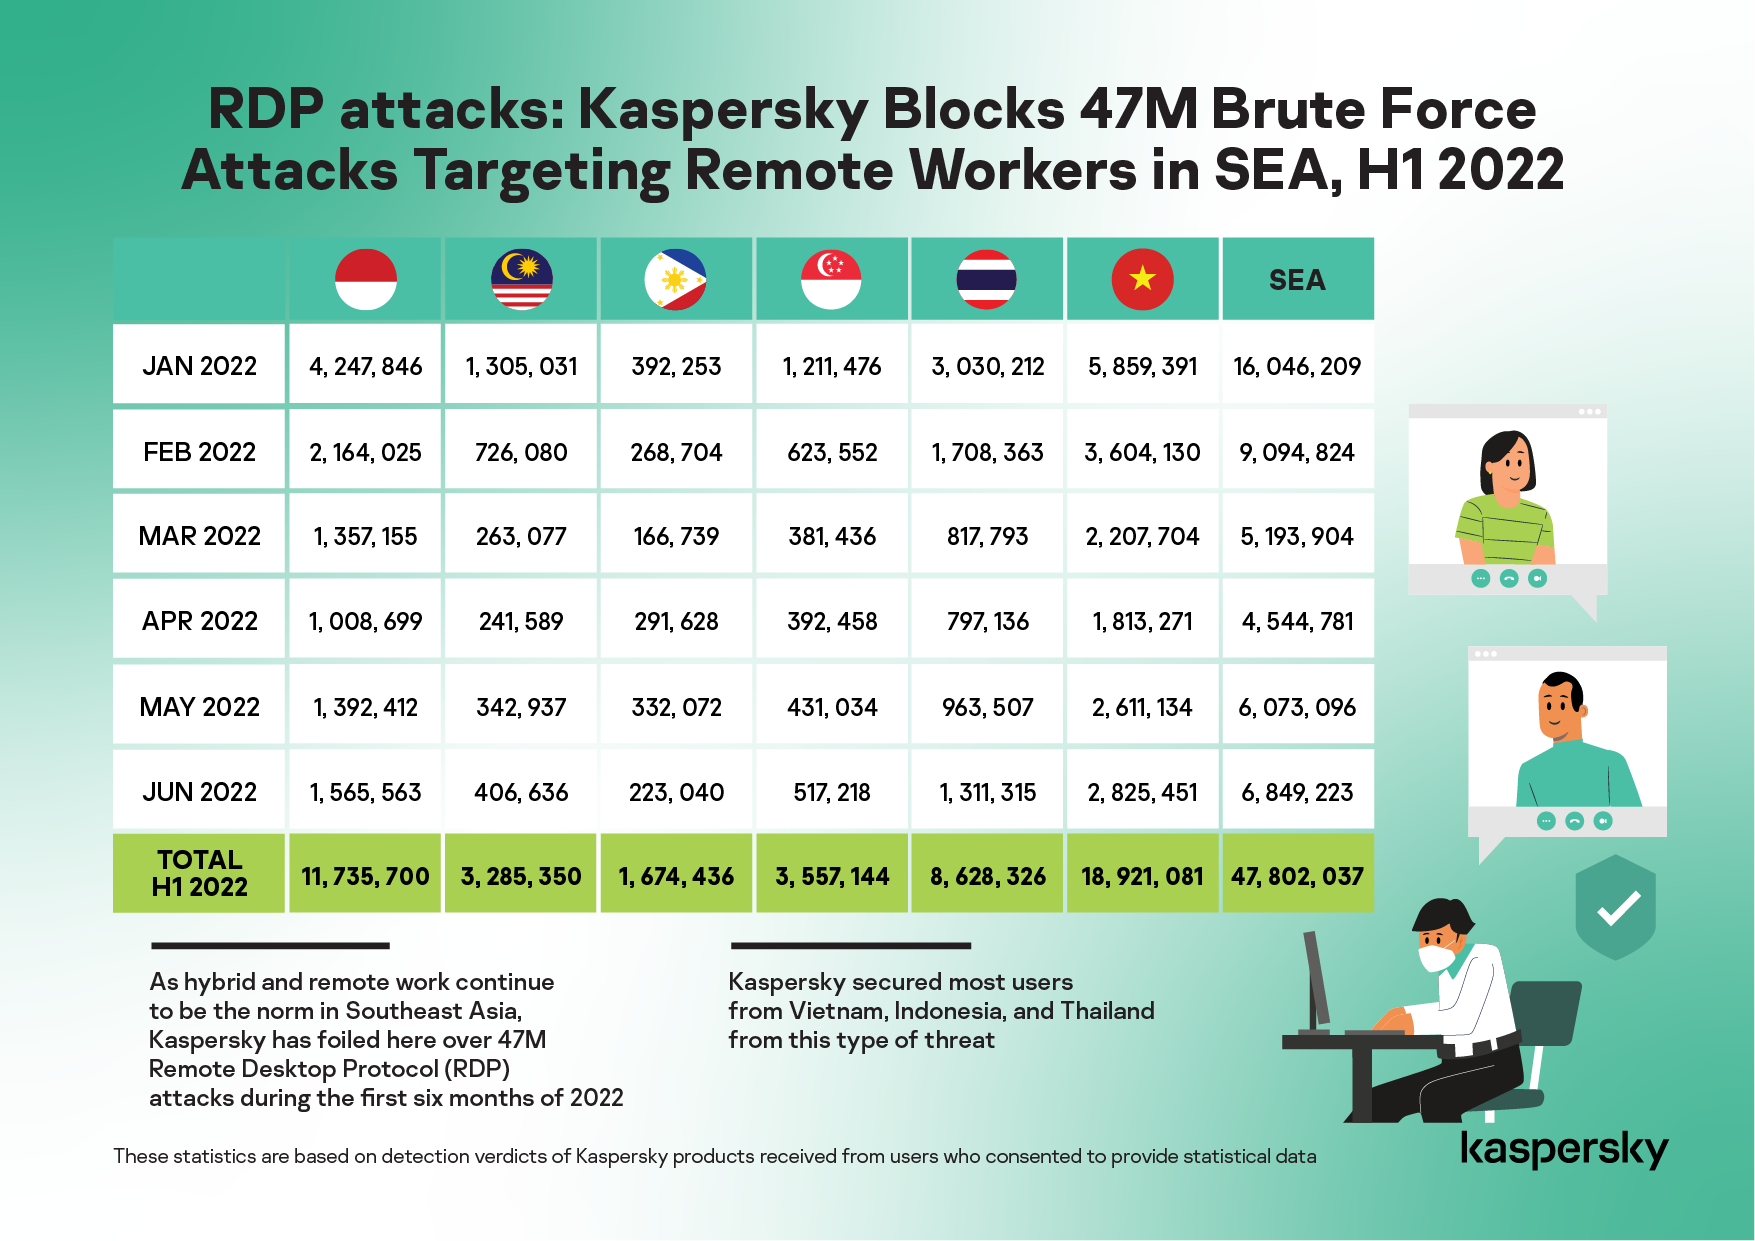 Remote workers in Vietnam prone to most cyber attacks in SE Asia: Kaspersky